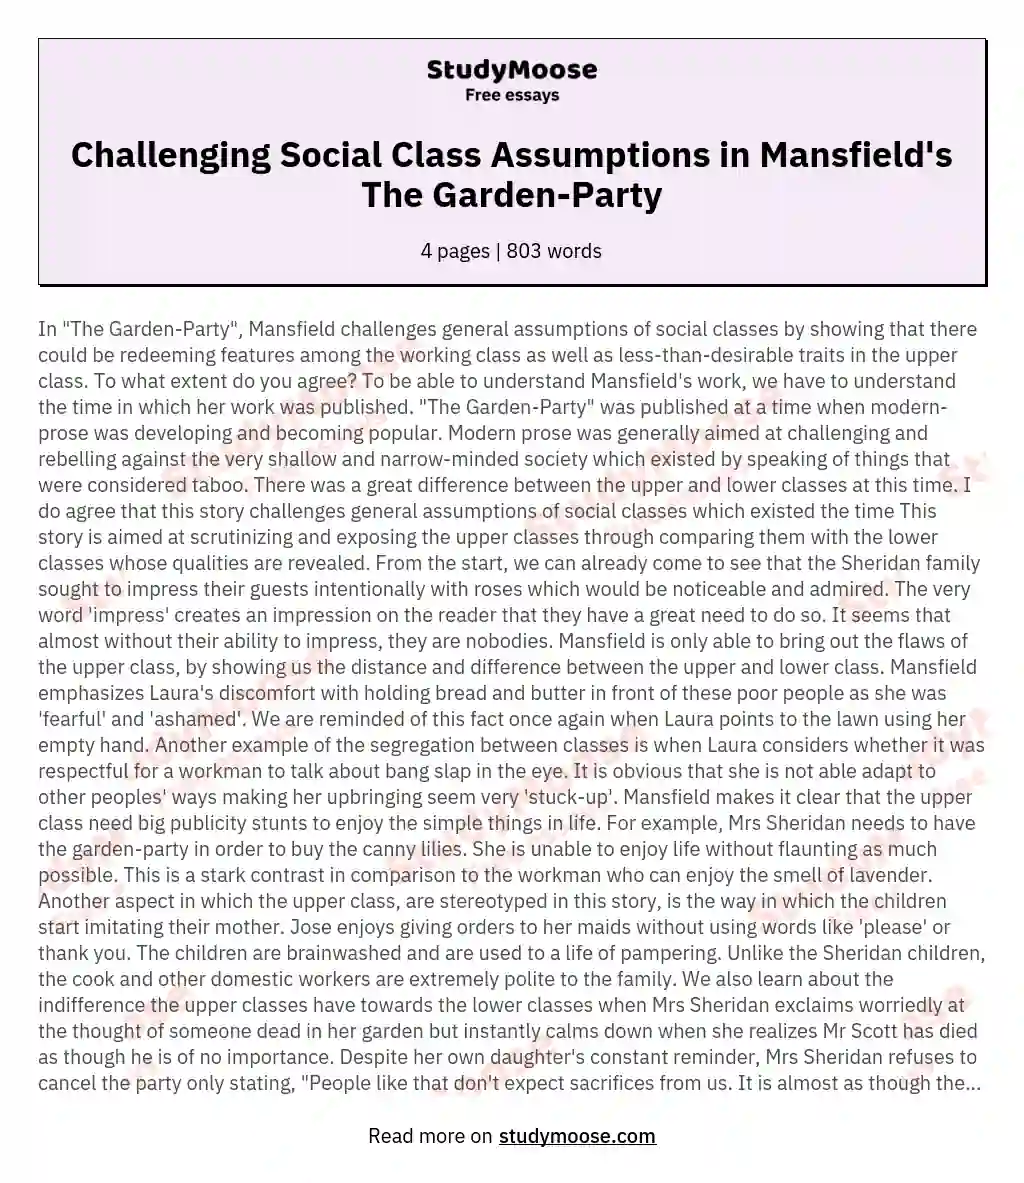 Challenging Social Class Assumptions in Mansfield's The Garden-Party essay